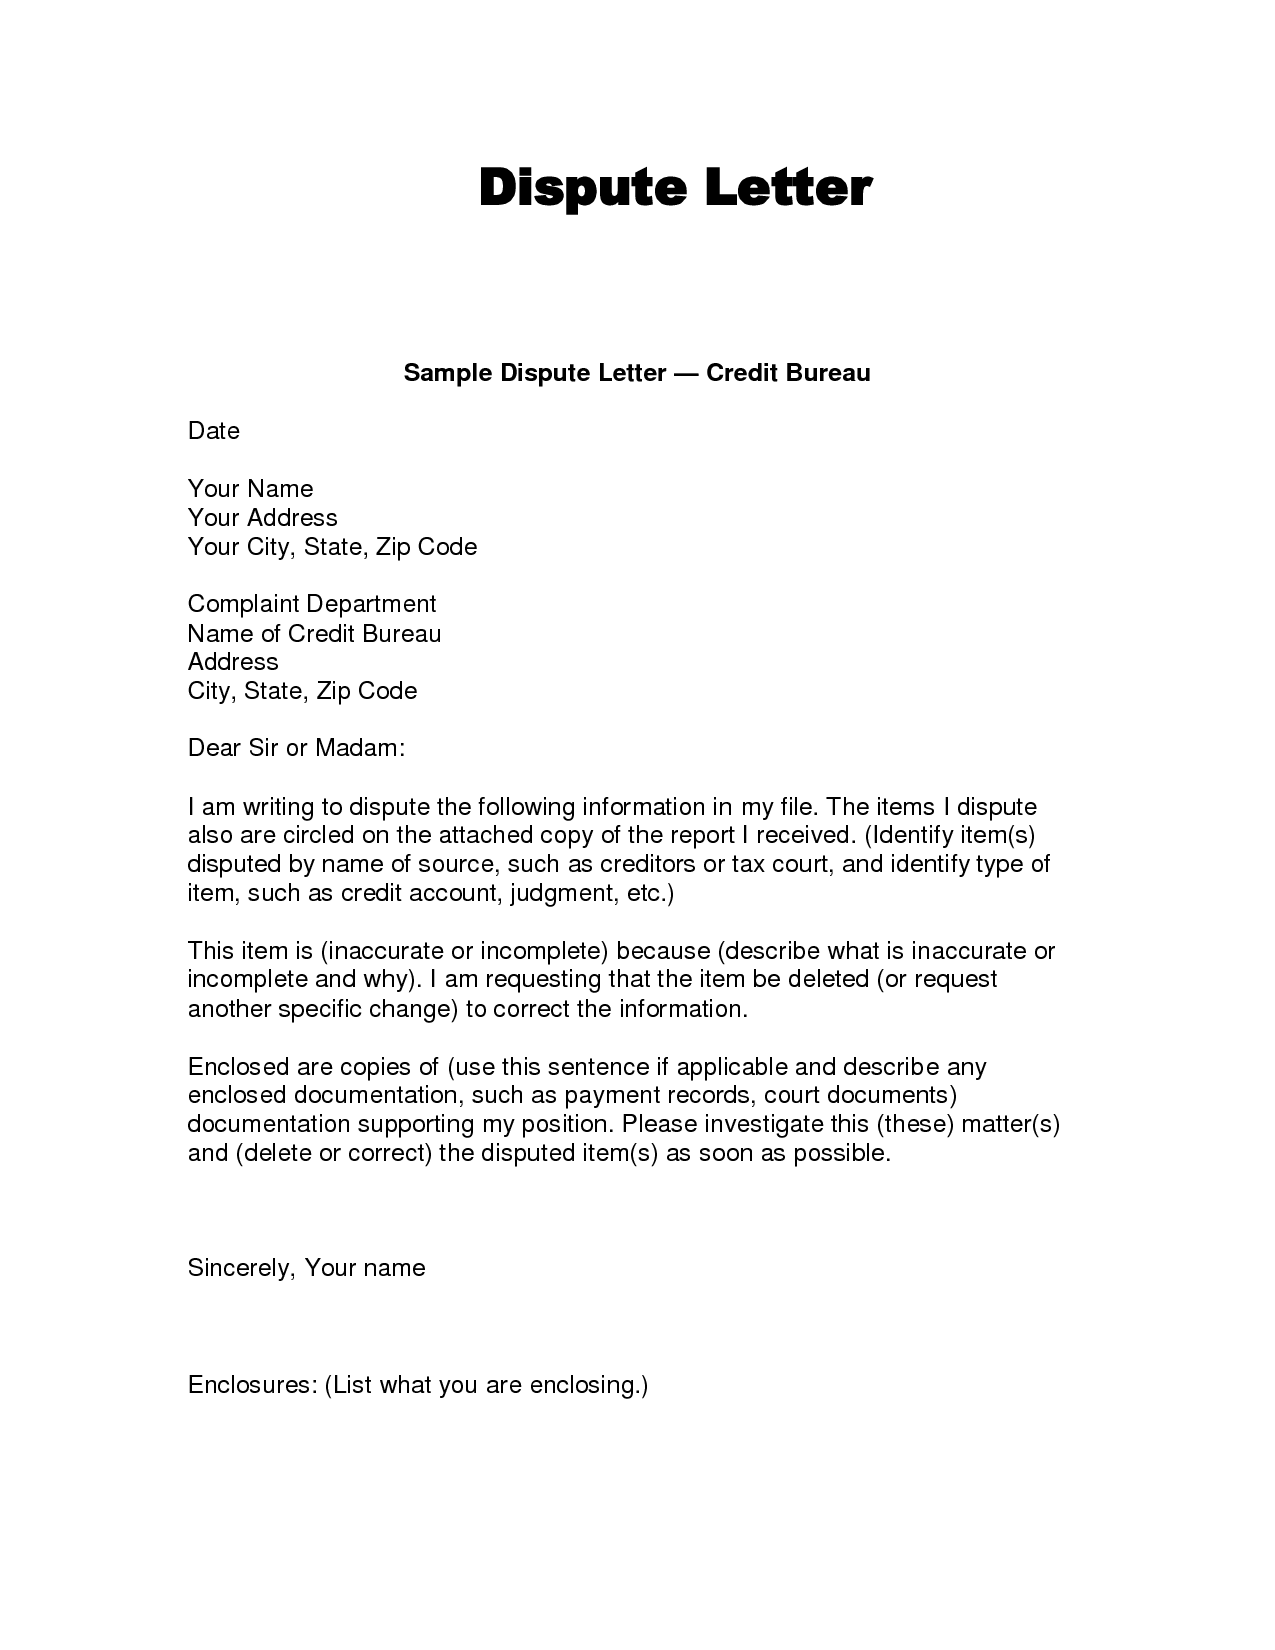 write a disagreement letter example